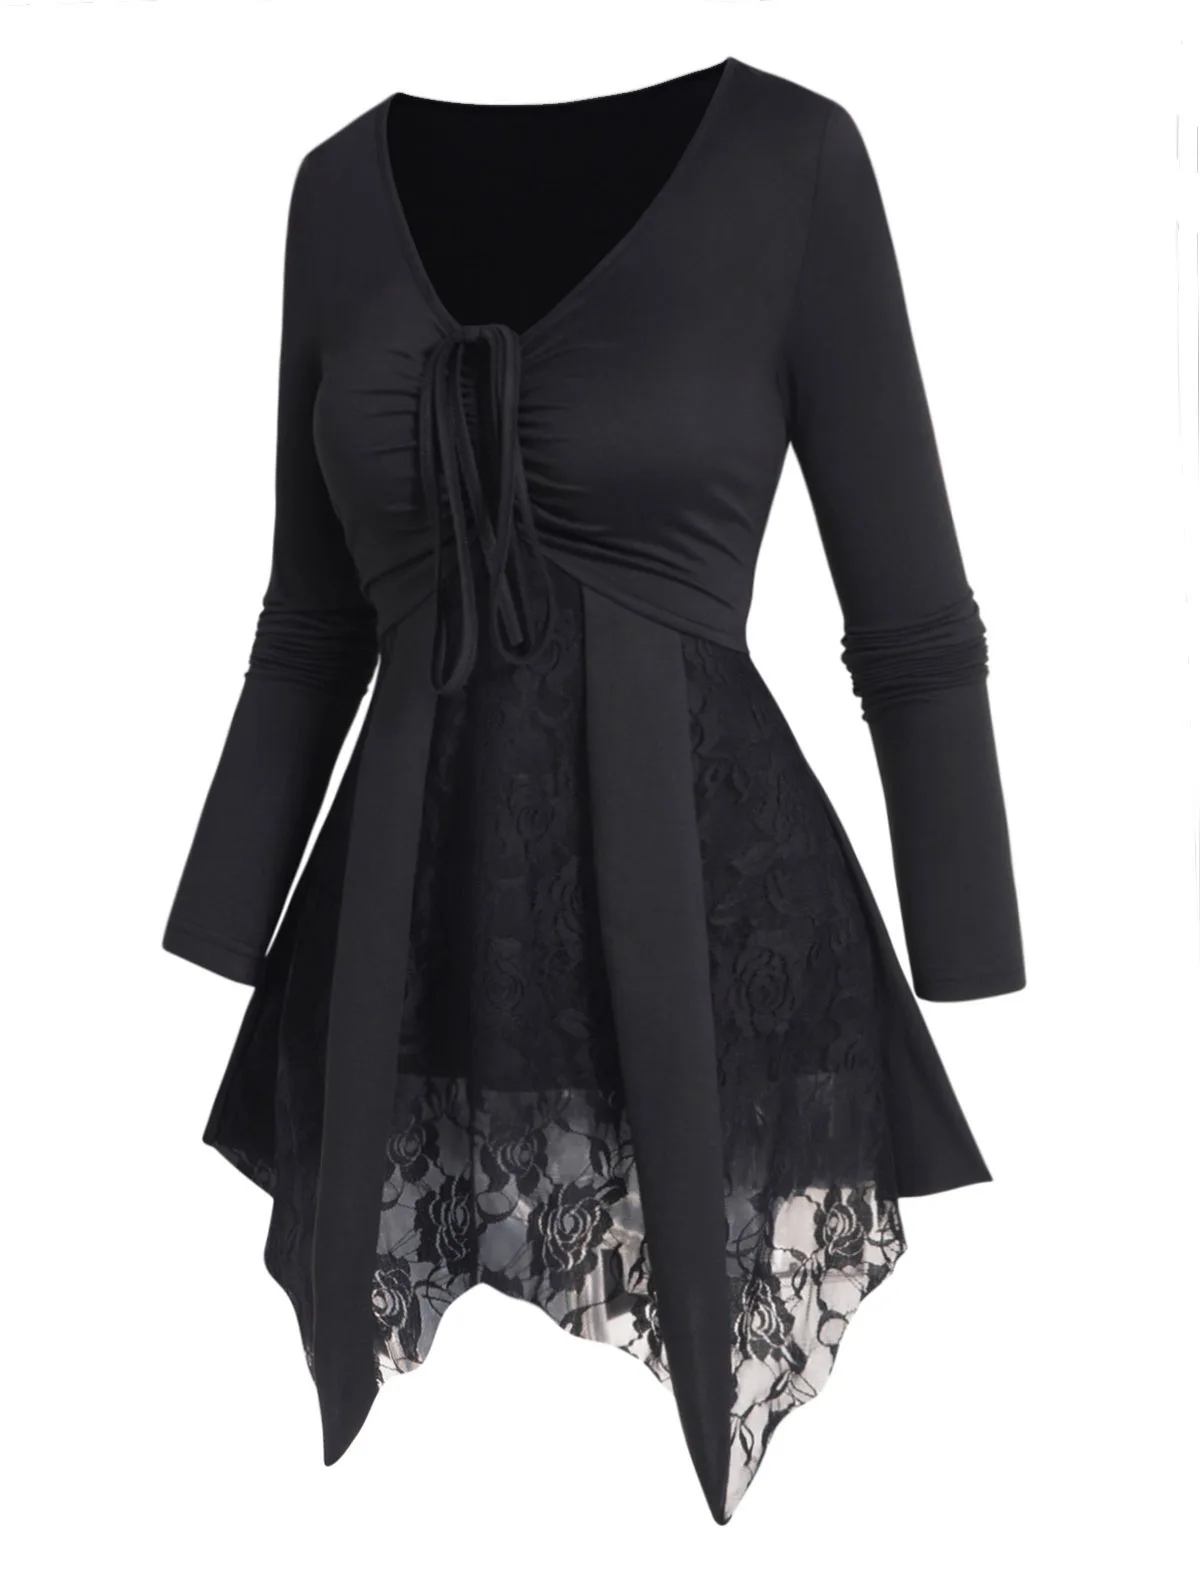 

Dressfo Plain Black Color Top See Thru Flower Lace Panel Cinched Full Sleeve Asymmetrical Long Top For Women Spring New